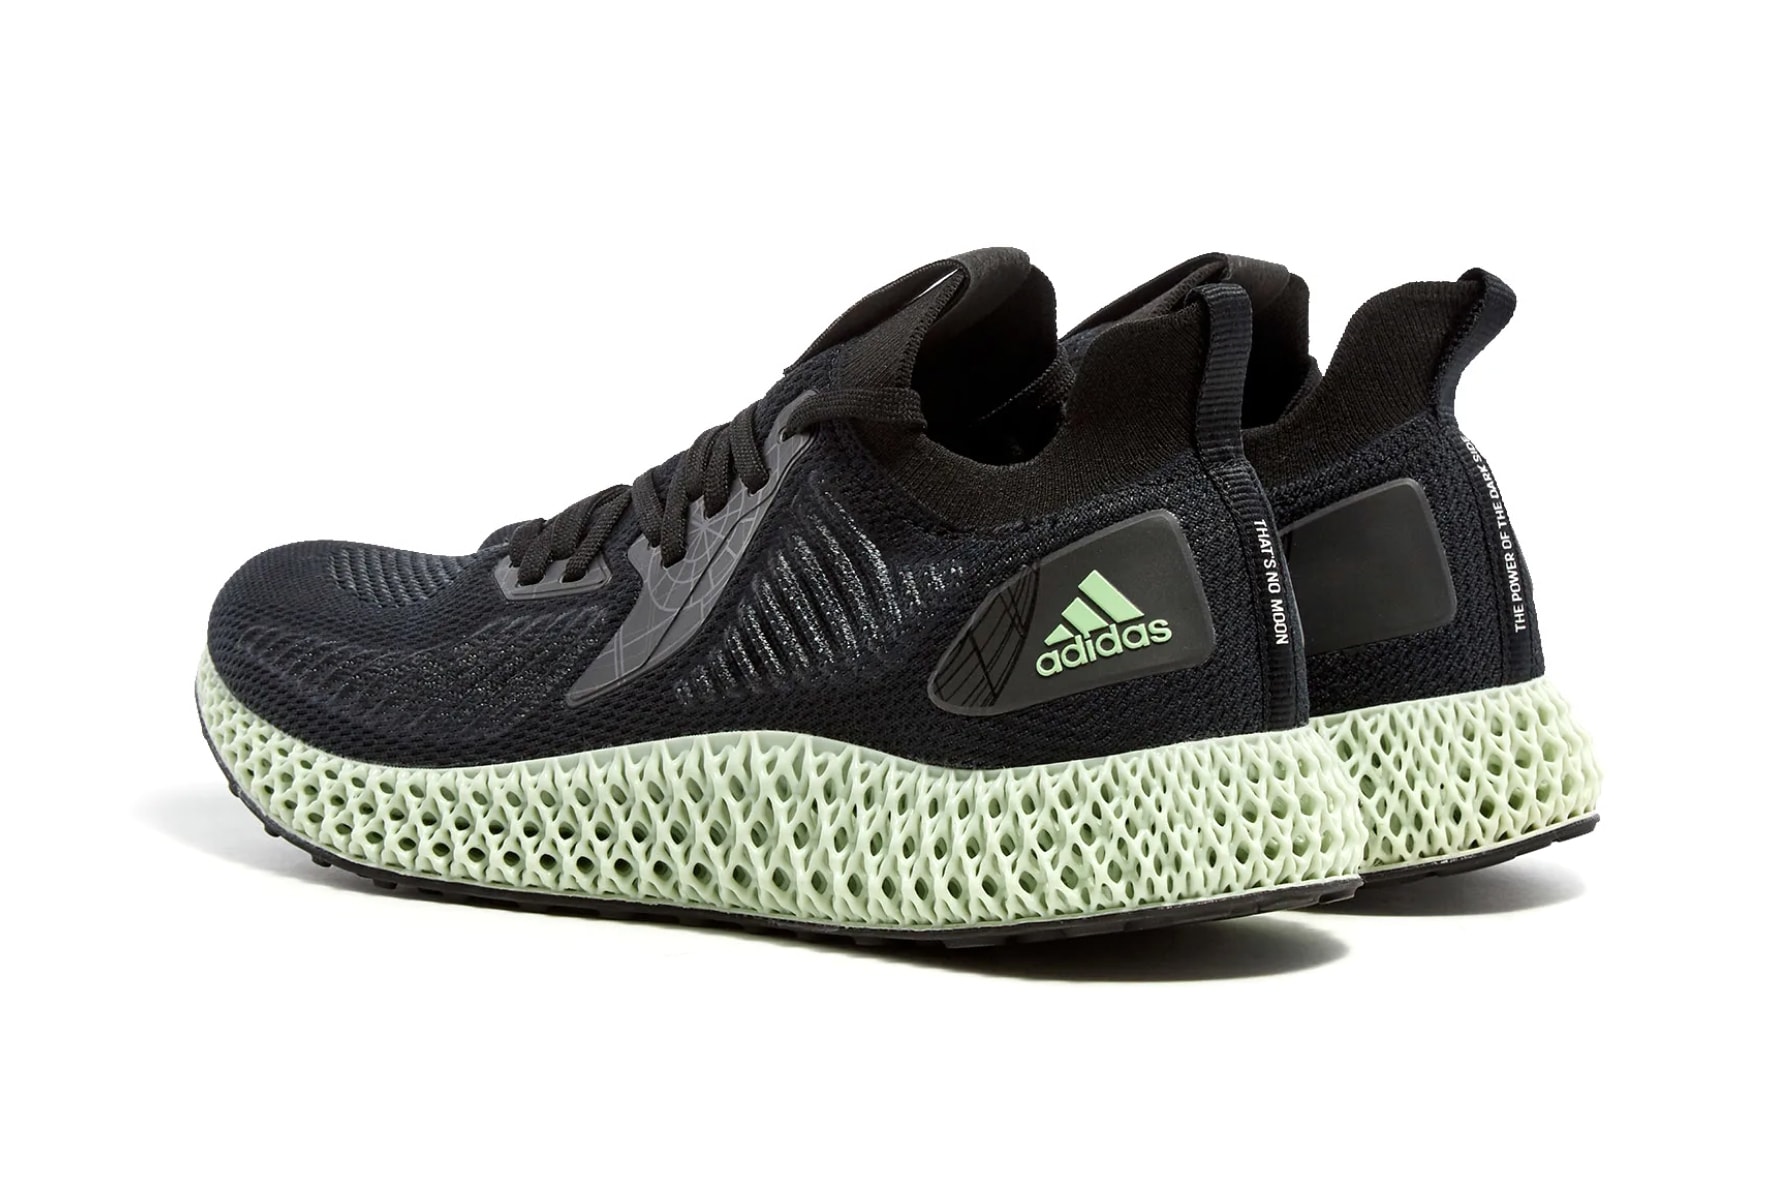 Star Wars & adidas Ready the AlphaEdge 4D "Death Star" collaborations end. clothing raffles movies darth vader release information 